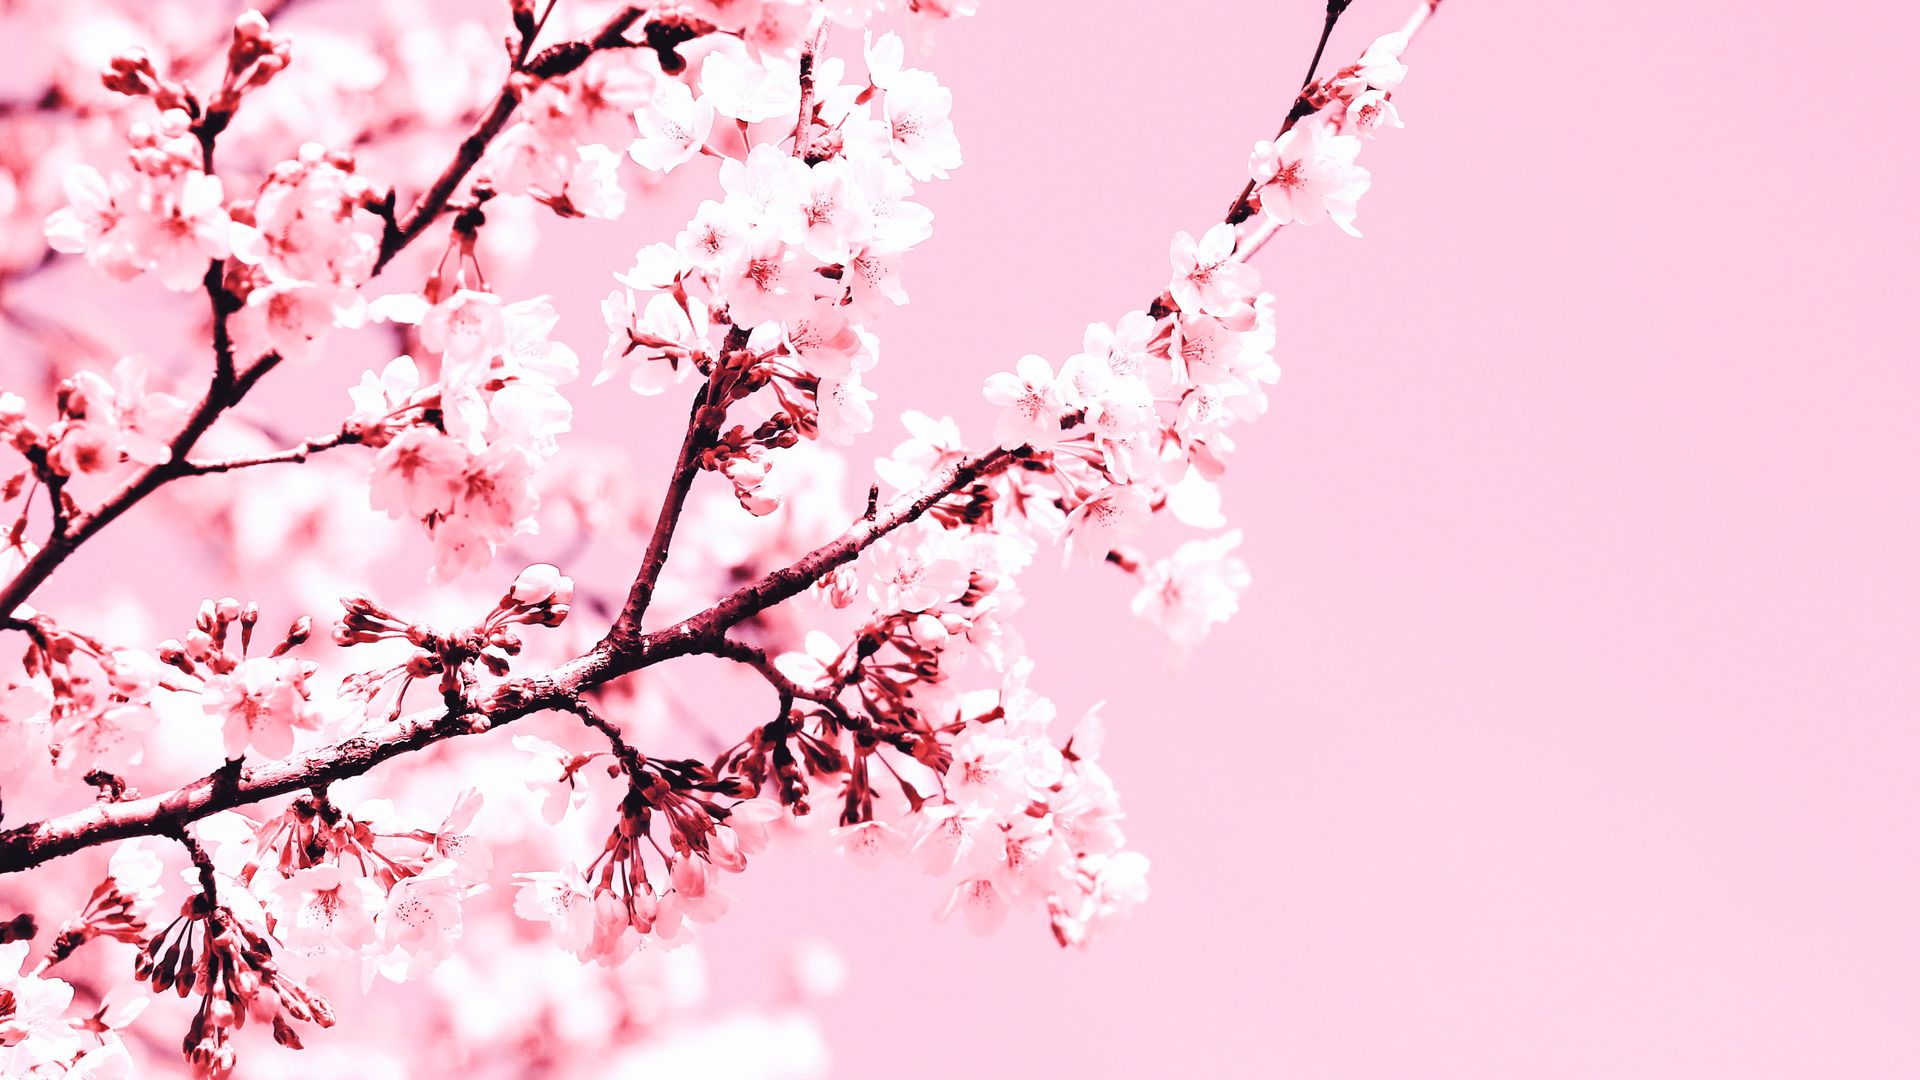 Download wallpaper 1920x1080 cherry blossom, flowers, branch, pink, plant,  bloom full hd, hdtv, fhd, 1080p hd background